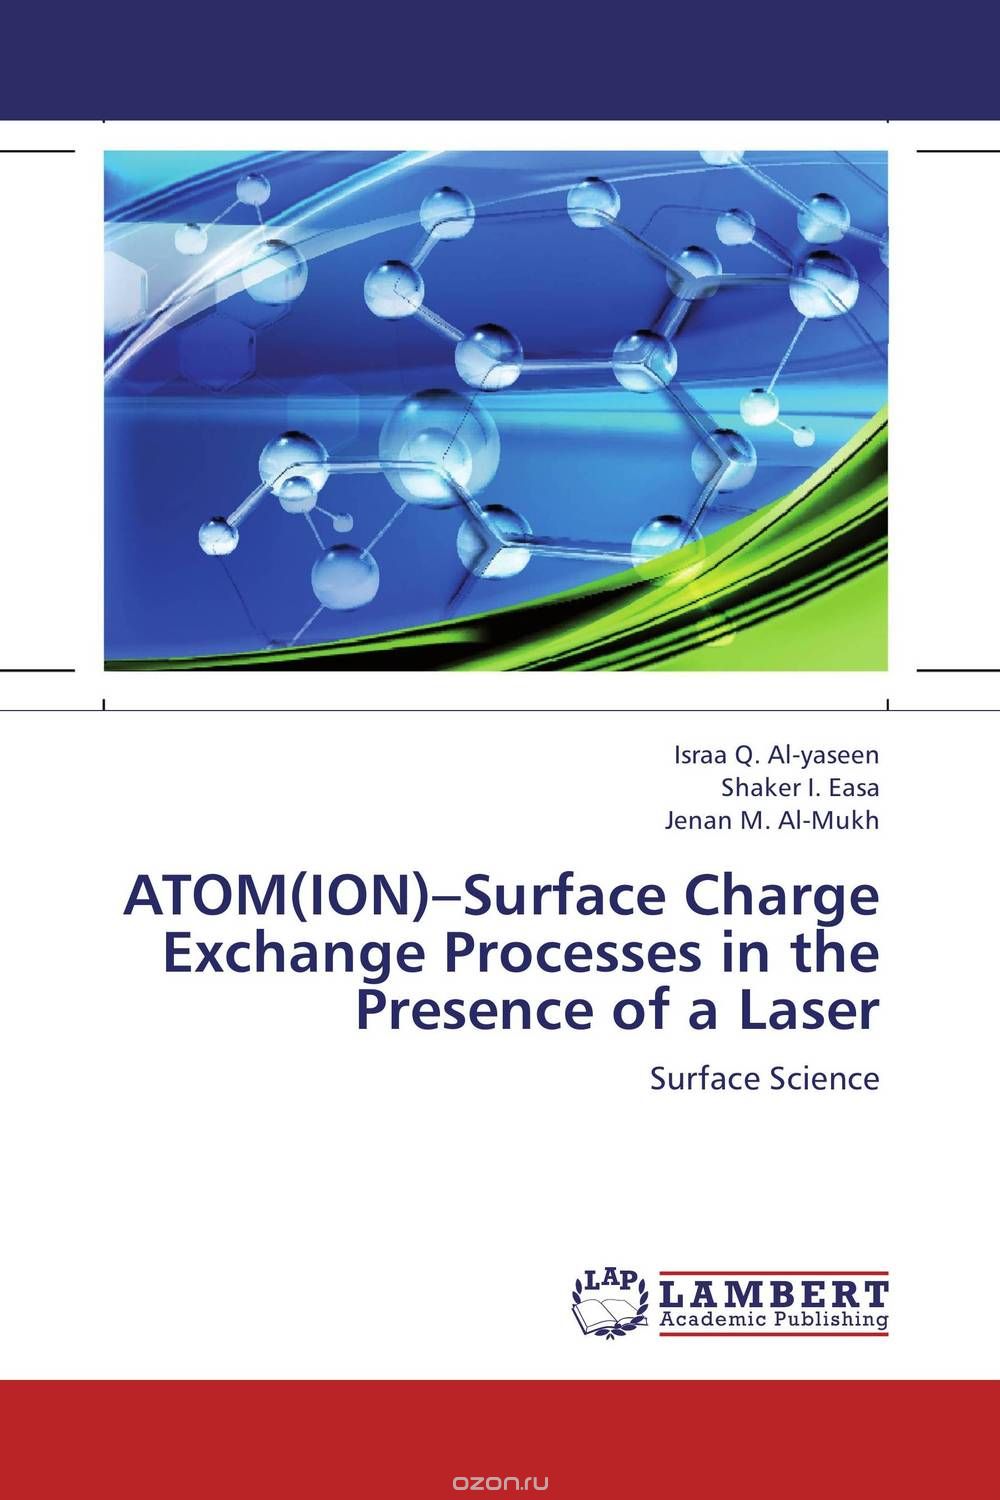 ATOM(ION)–Surface Charge Exchange Processes in the Presence of a Laser